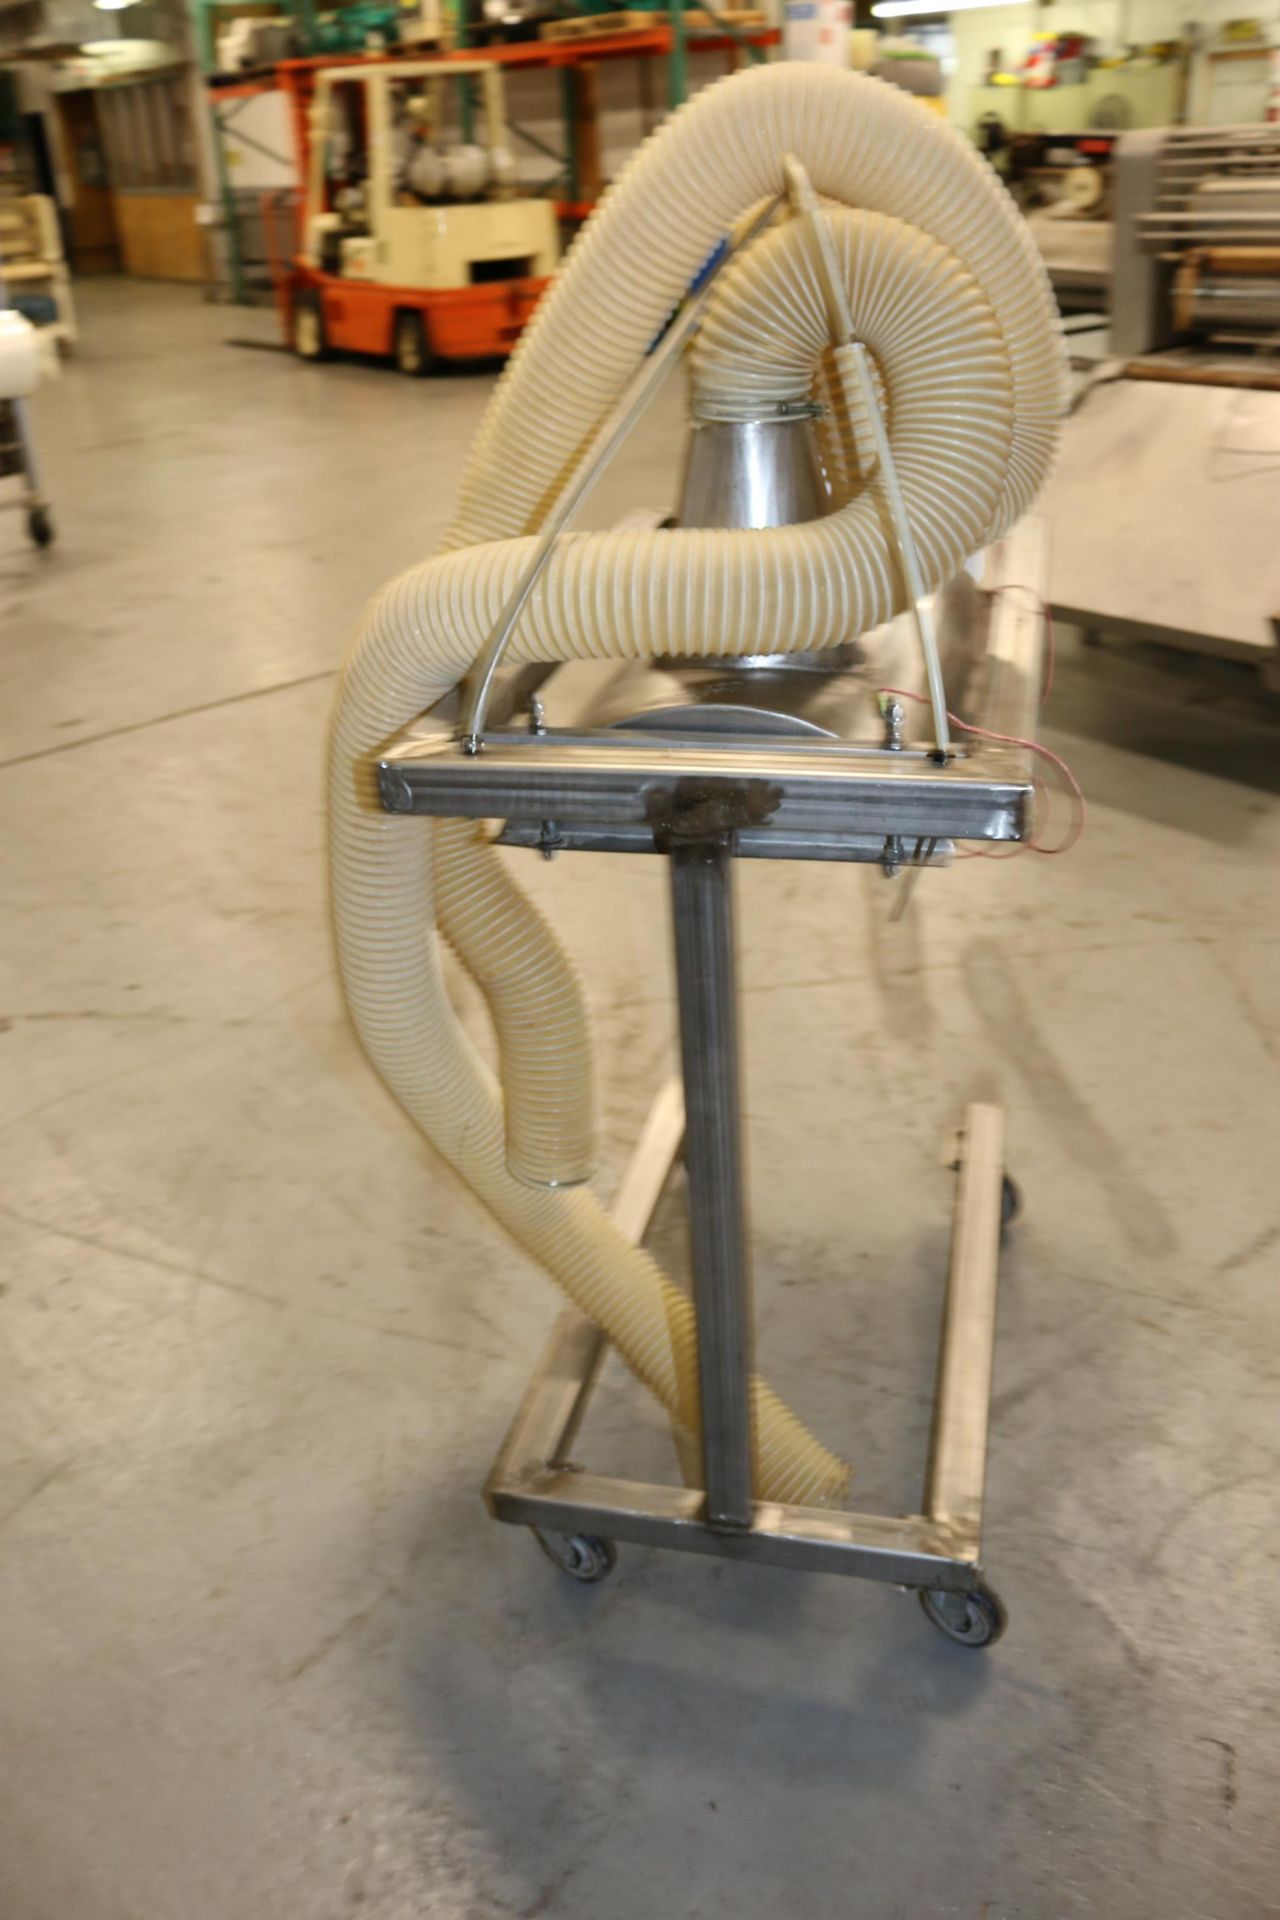 Dual Chute S/S Hood Unit, with (2) Collection Hoses, Hood Dims.: Aprox. 27-1/2" L x 16" W, Hood Sits - Image 5 of 7